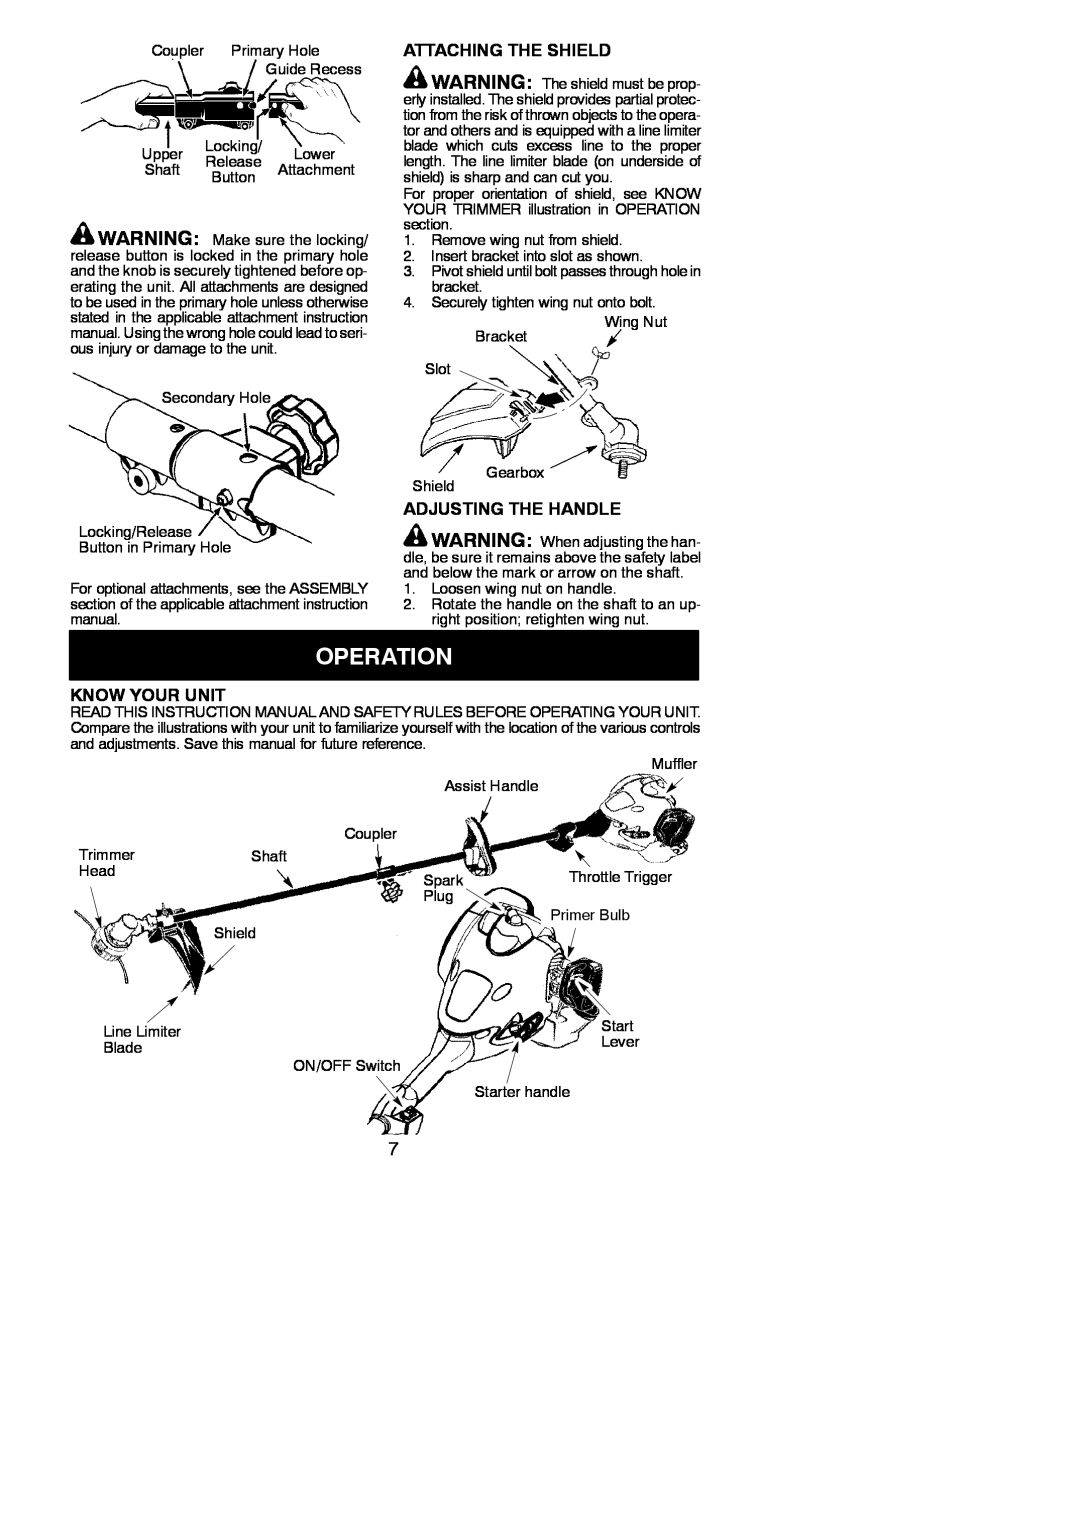 Poulan PP125 instruction manual Operation, Attaching The Shield, Adjusting The Handle, Know Your Unit 